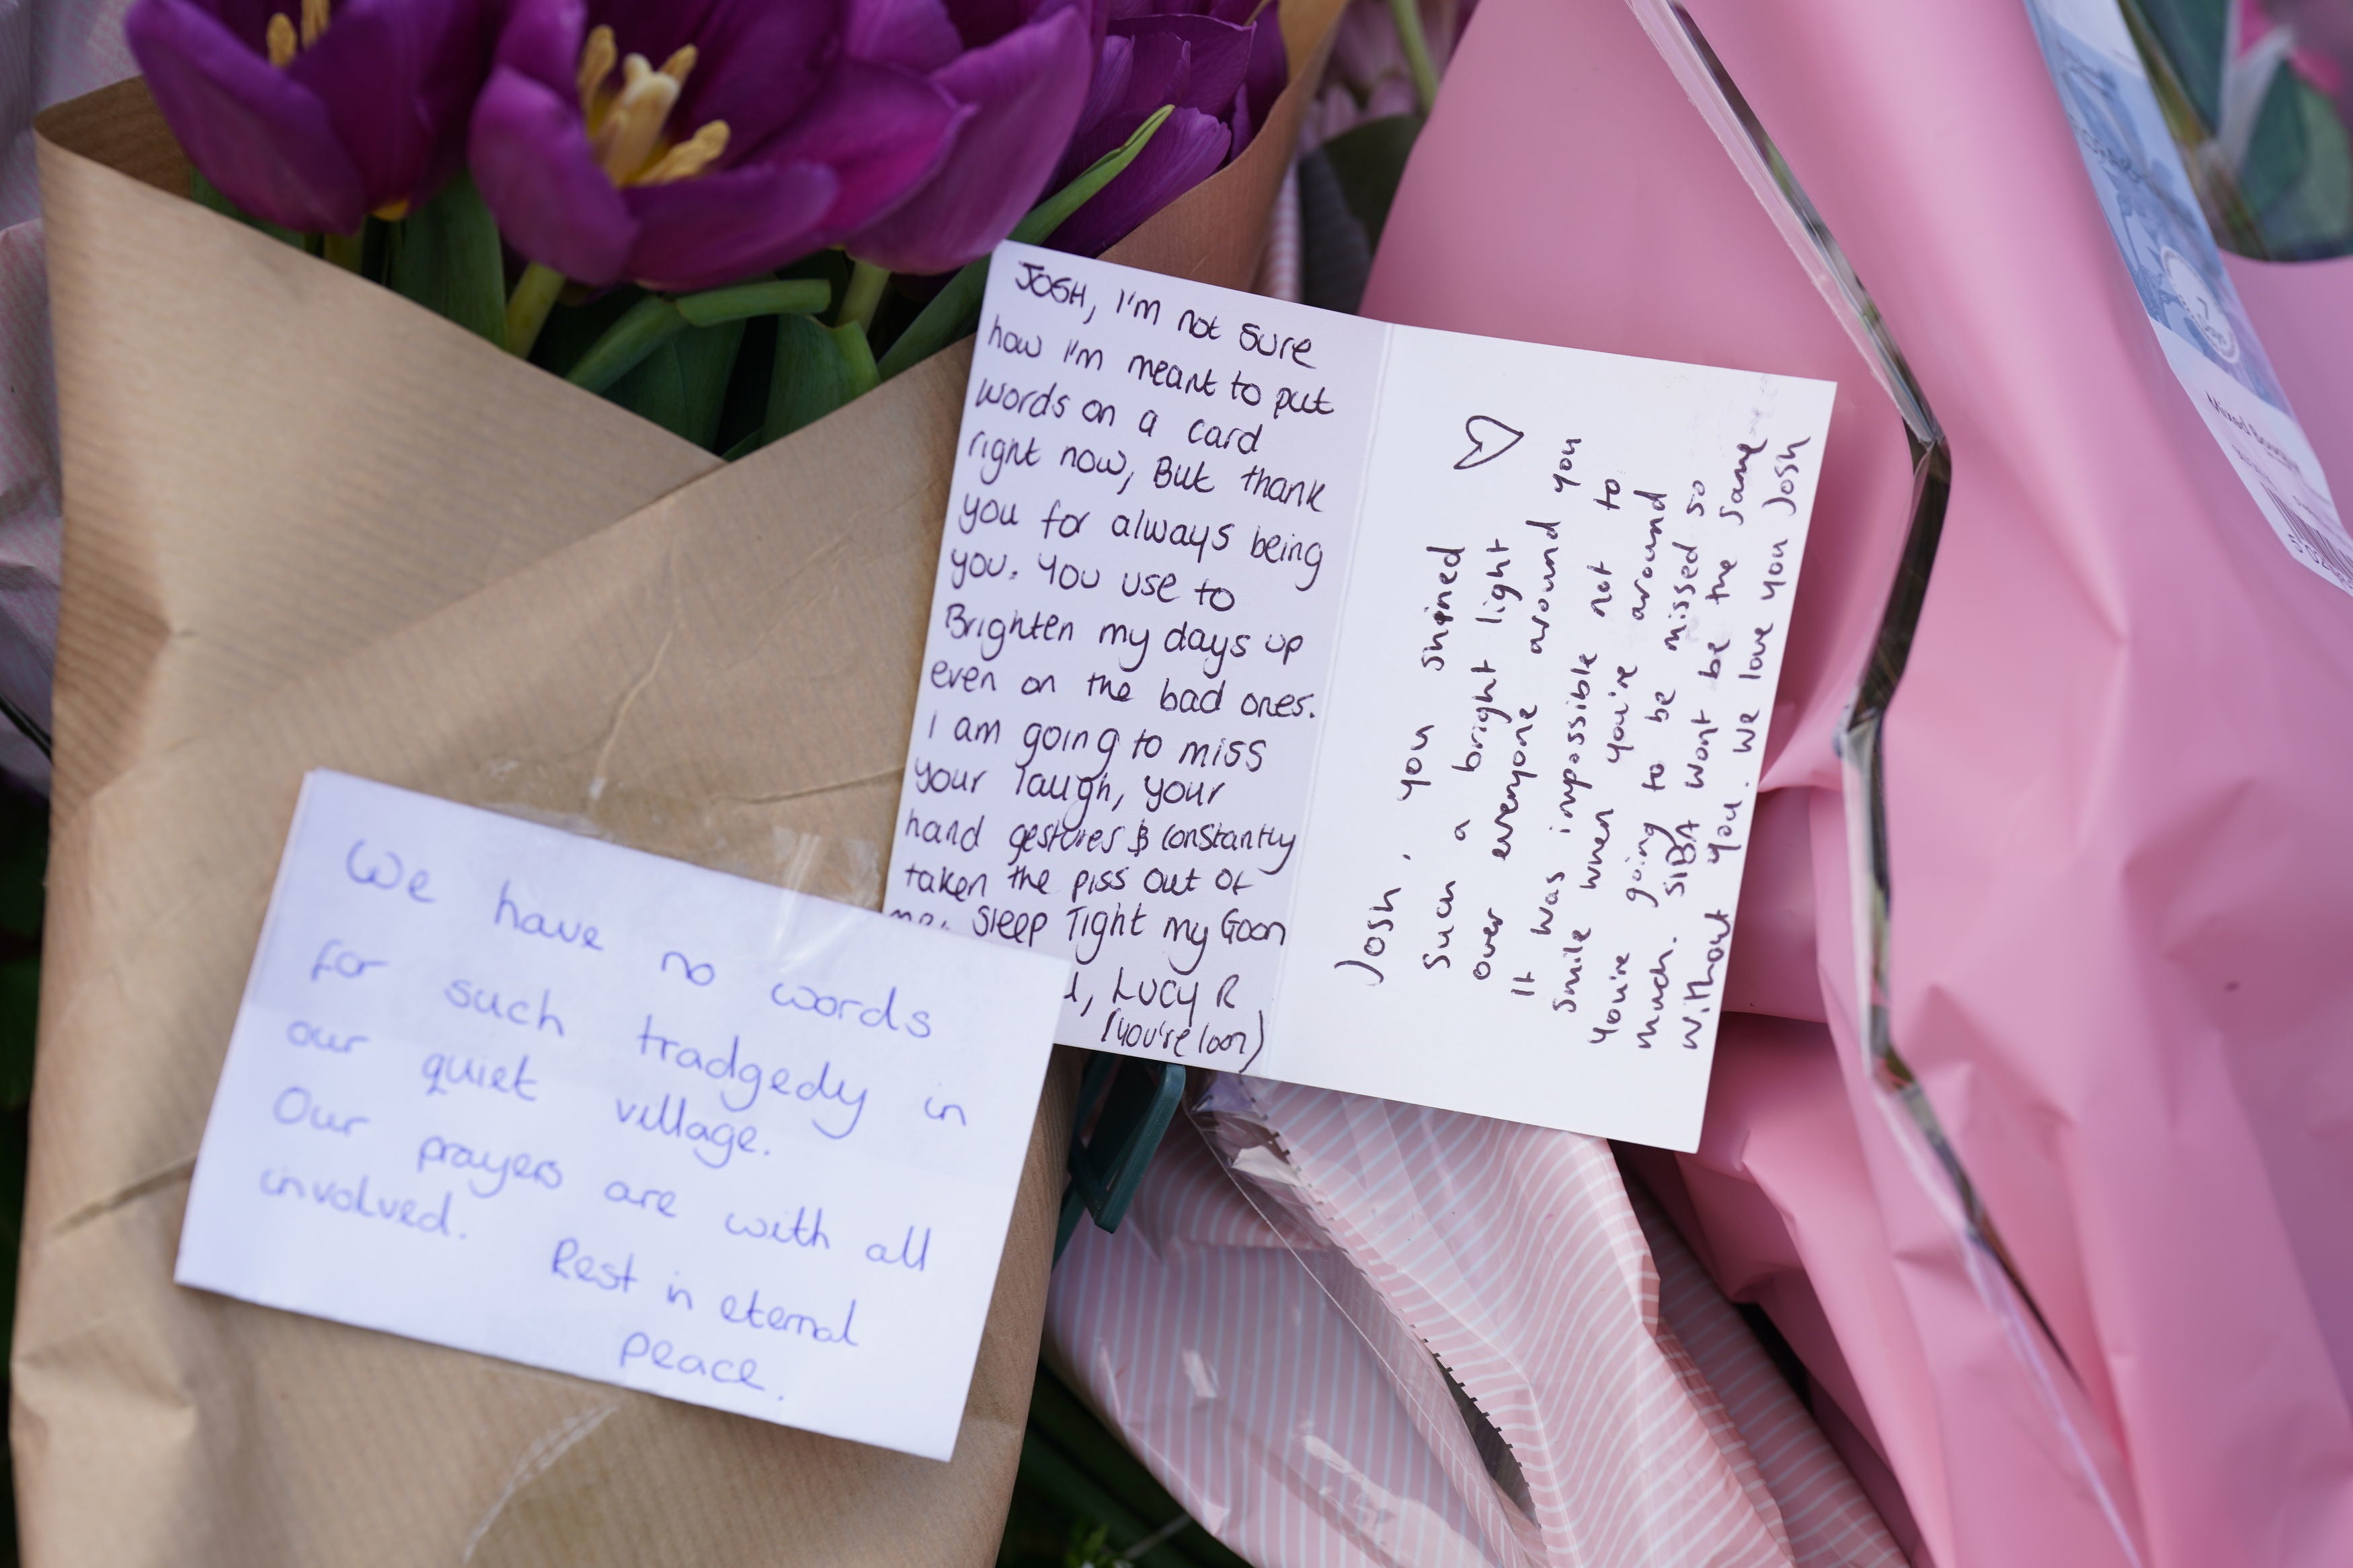 Notes left in tribute to the victims at the scene